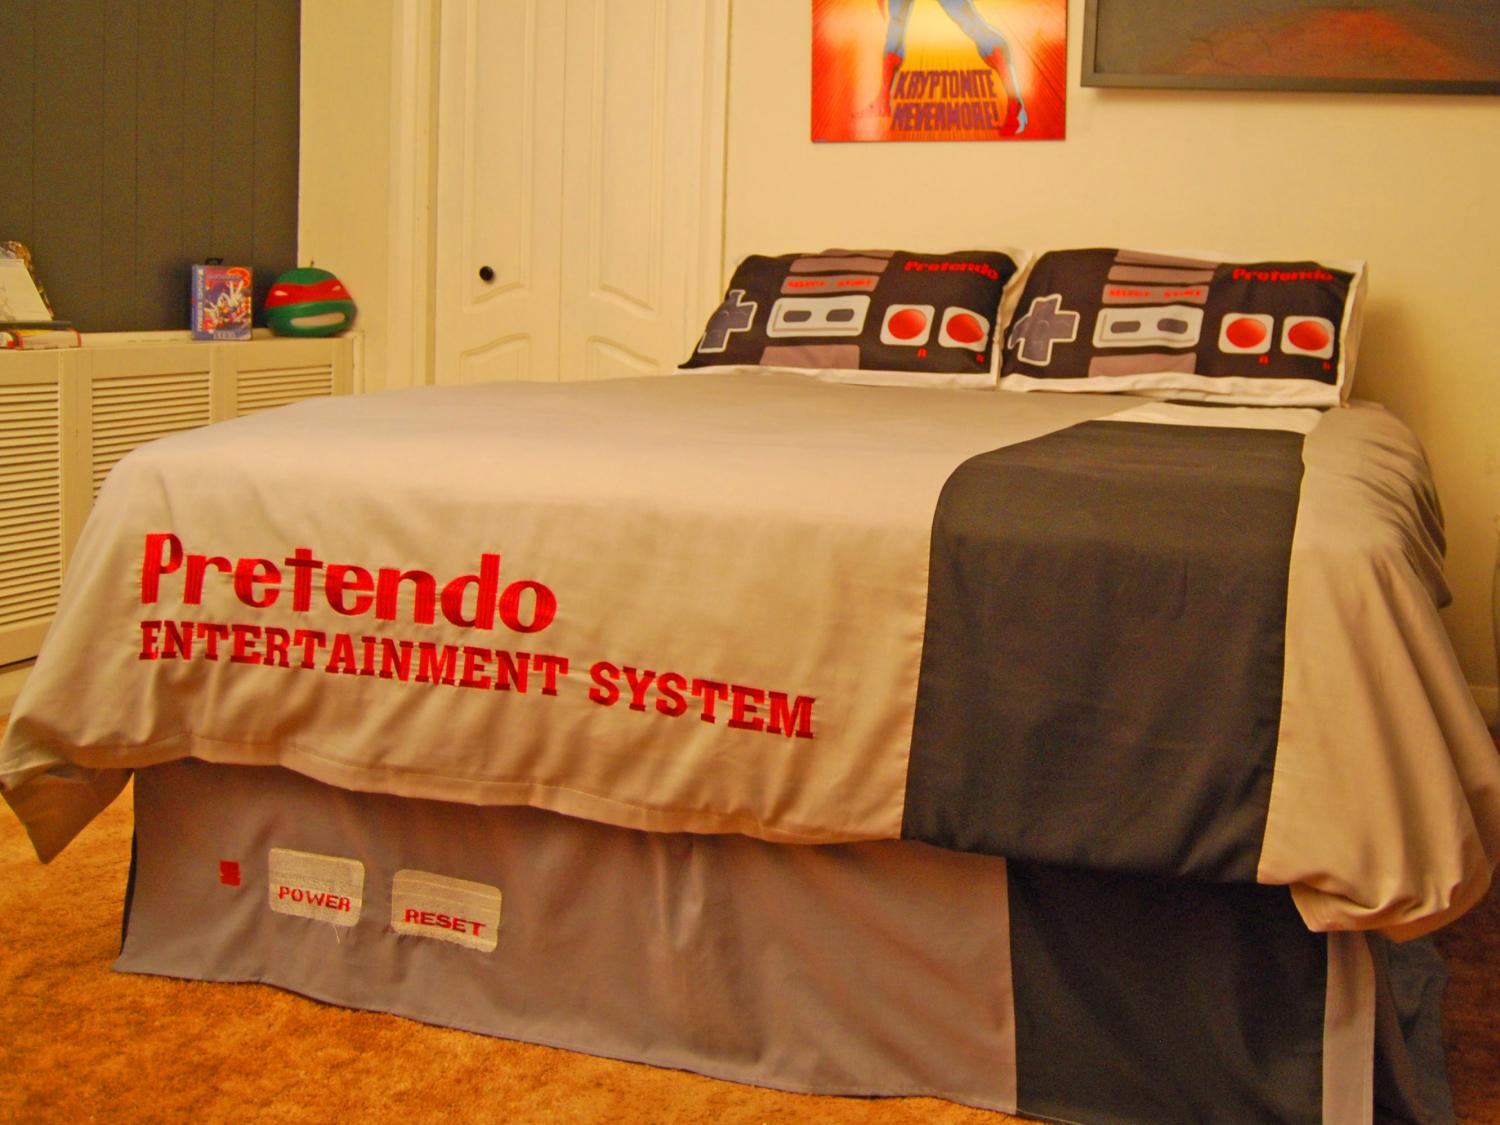 Nintendo Bedding Set - Geeky NES game console bedspread and pillowcases